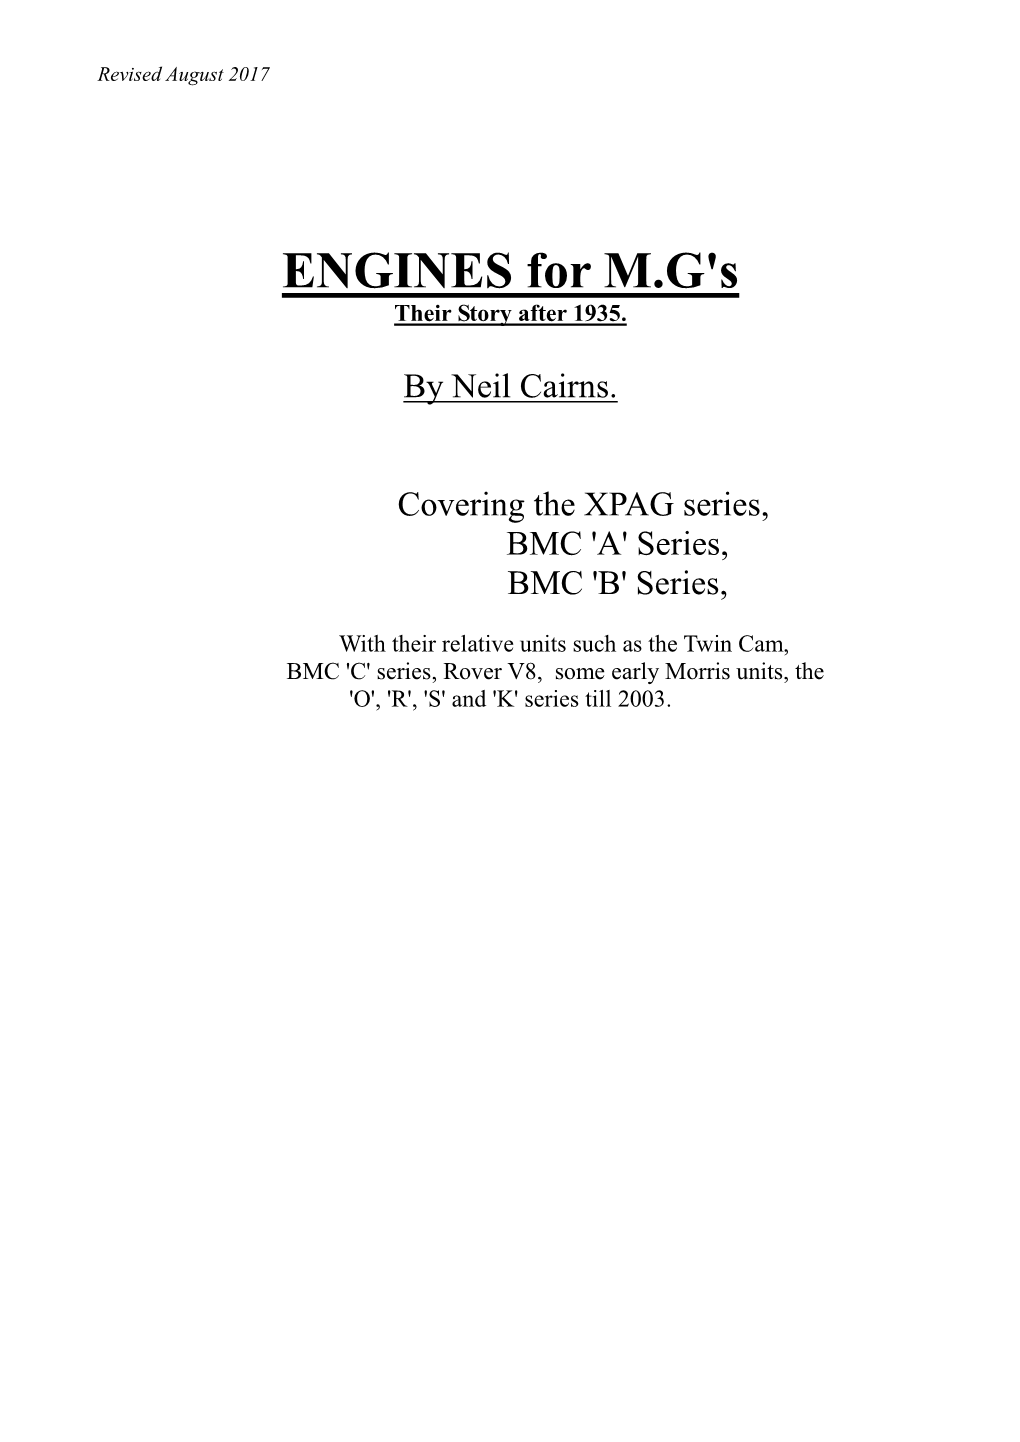 ENGINES for M.G's an Engine